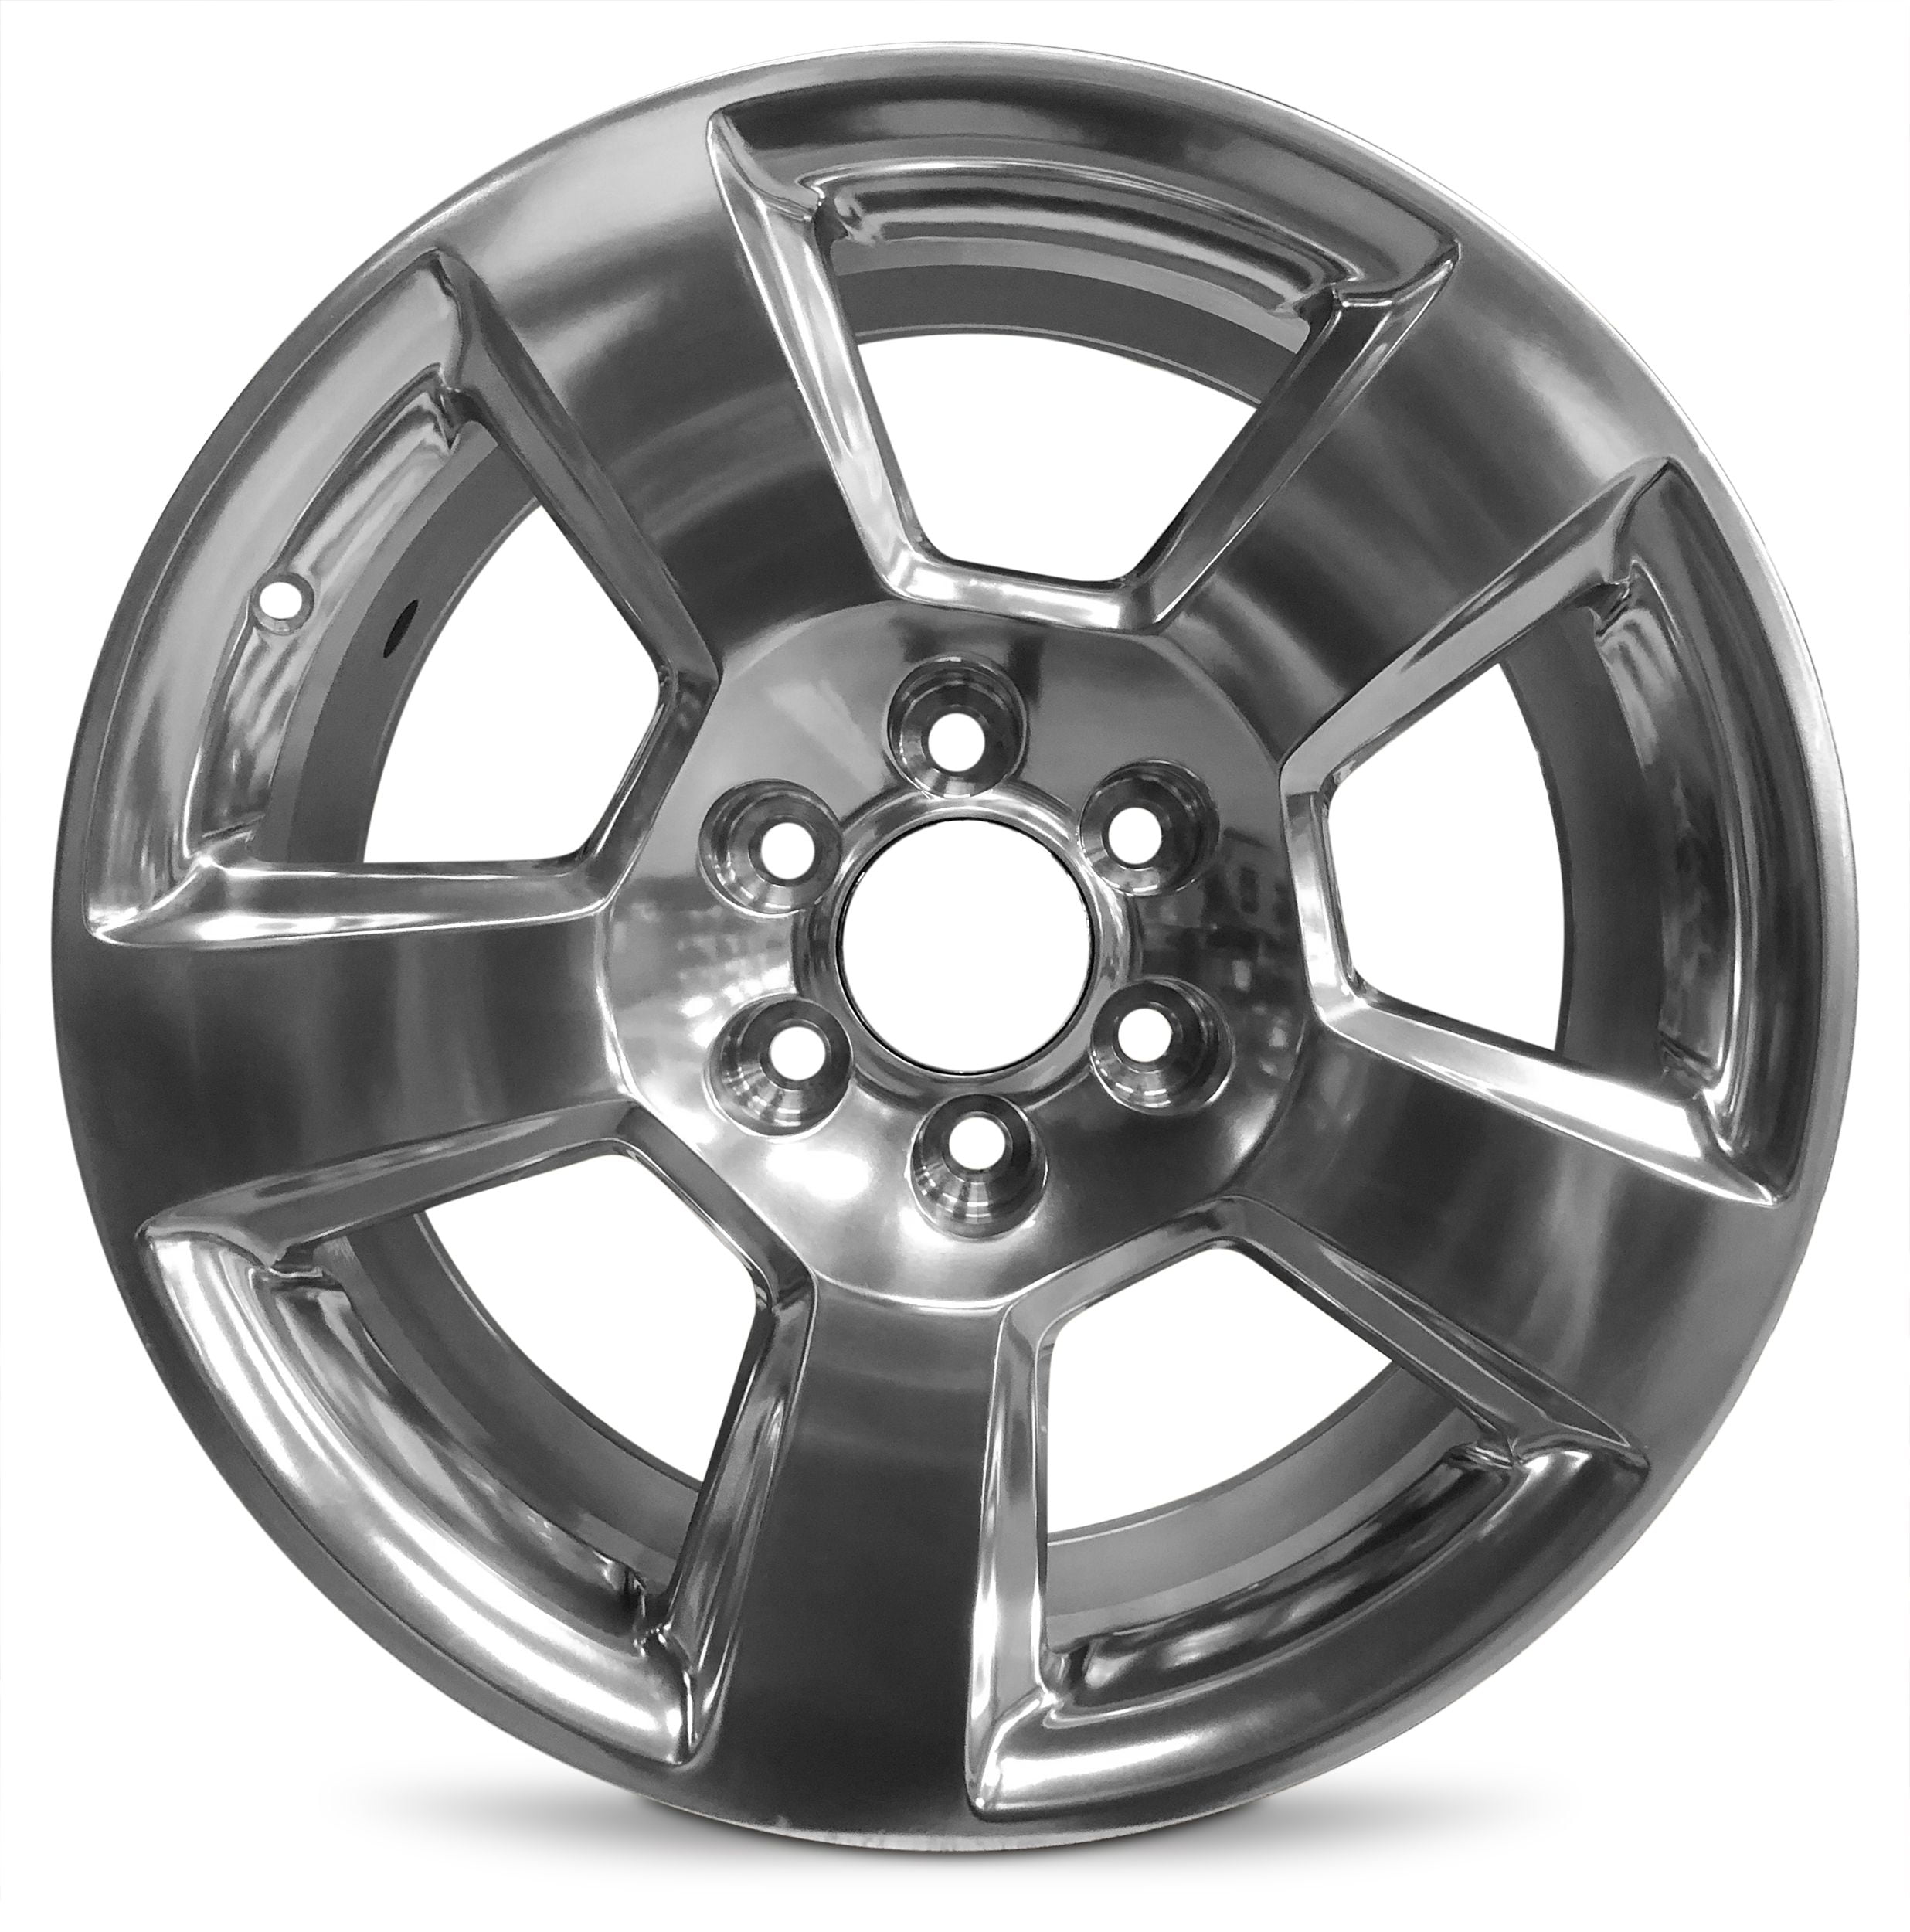 New 17" Replacement Alloy Wheel Rim for 2015-2018 Chevy Silverado 1500 Tahoe